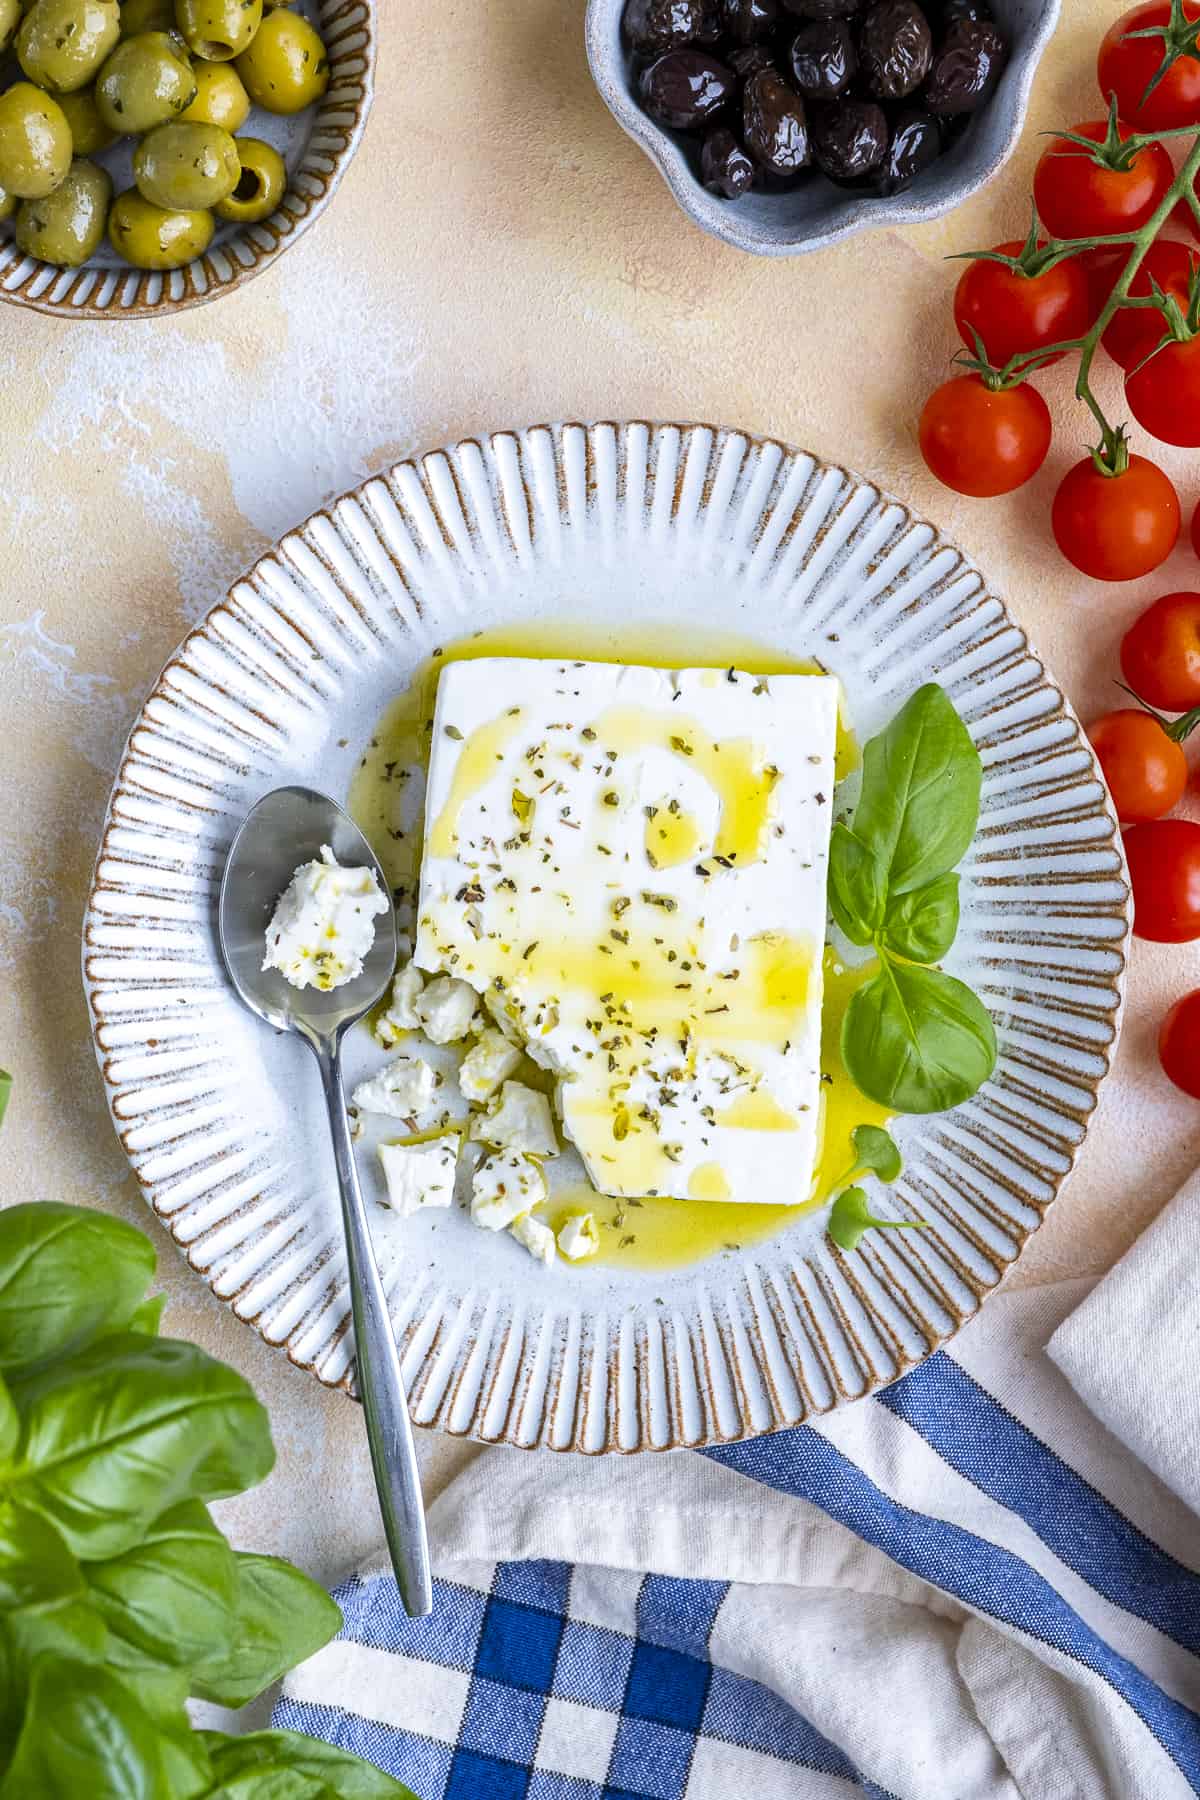 A block of feta cheese seasoned with oregano and drizzled with olive oil on a white plate. Olives, tomatoes and fresh basil on the side.